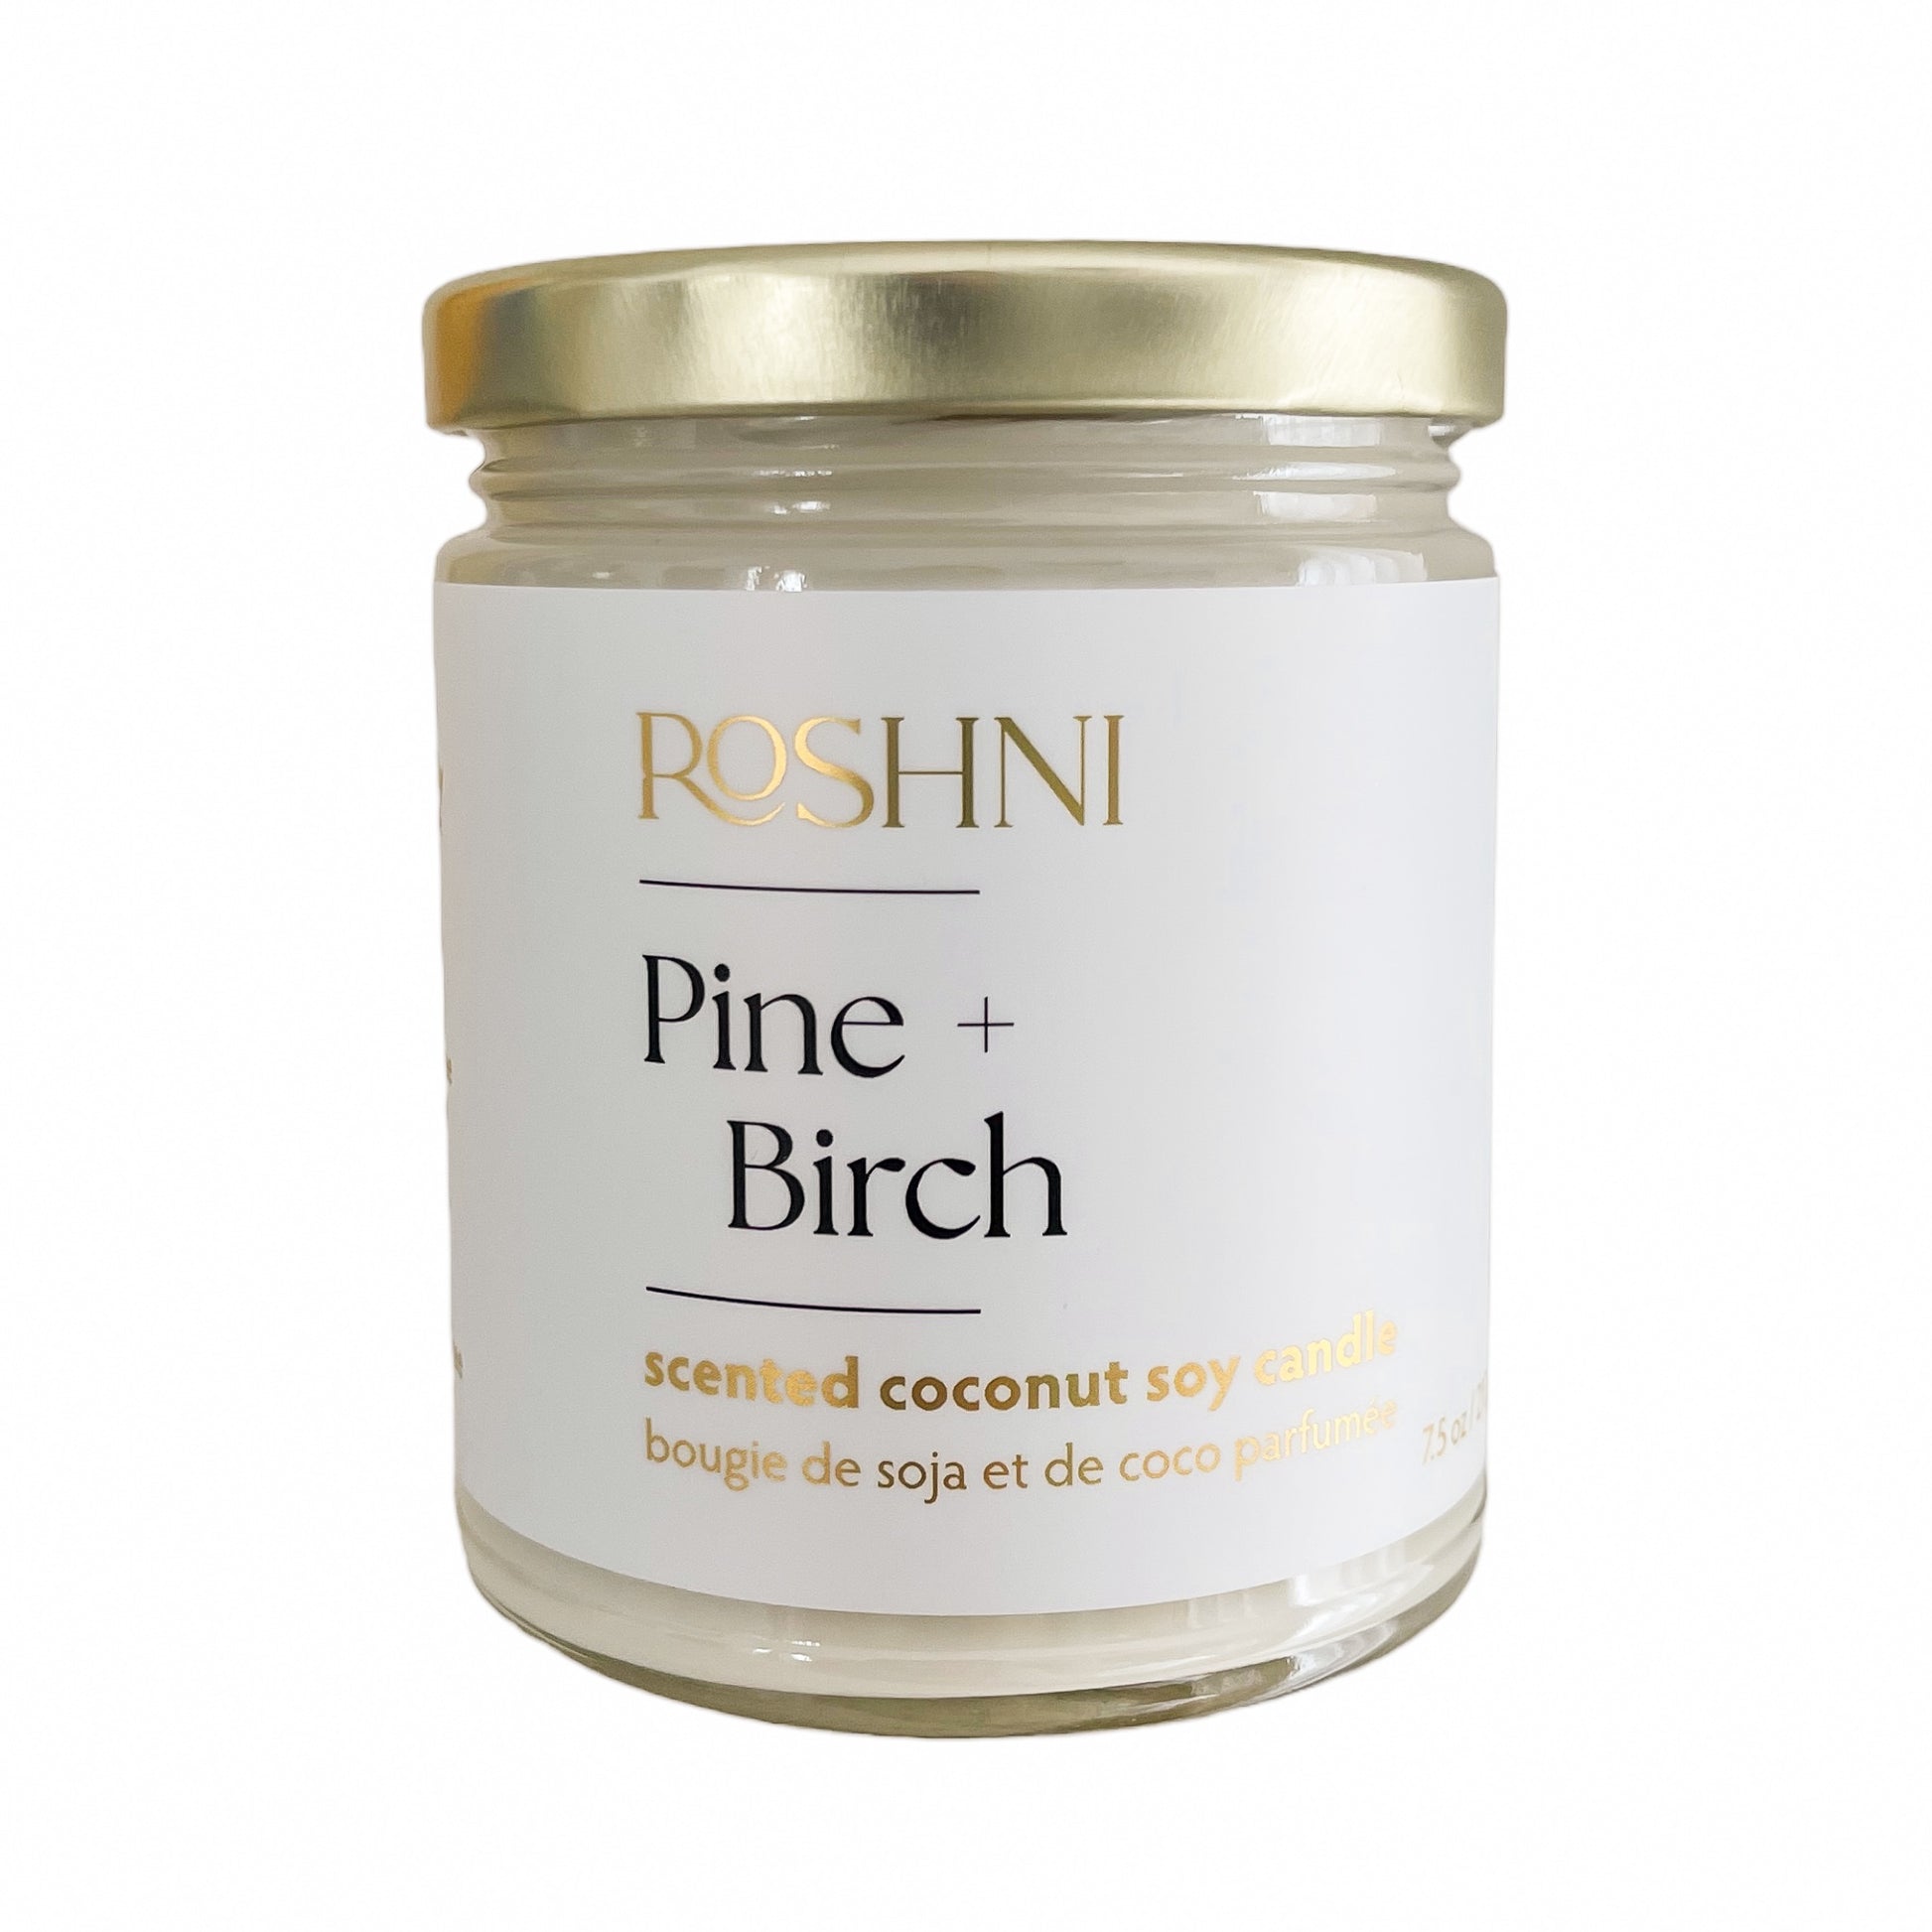 Pine Birch candle